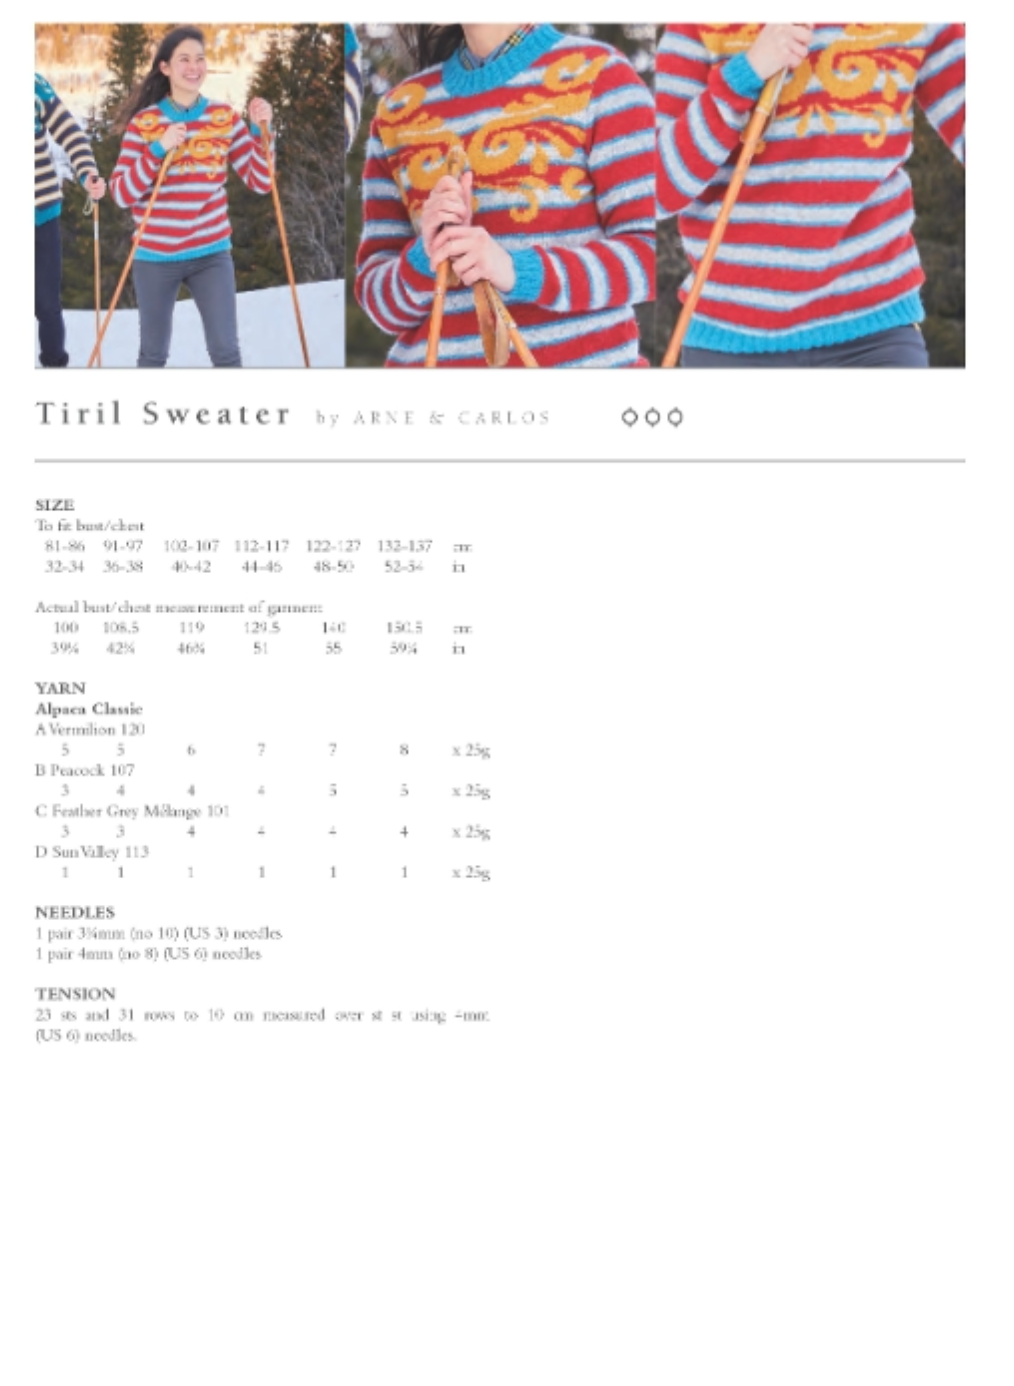 Tiril sweater. A White, red and thin blue striped sweater, with an icy blue trim and cuffs. This sweater has a yellow nordic pattern across the chest.